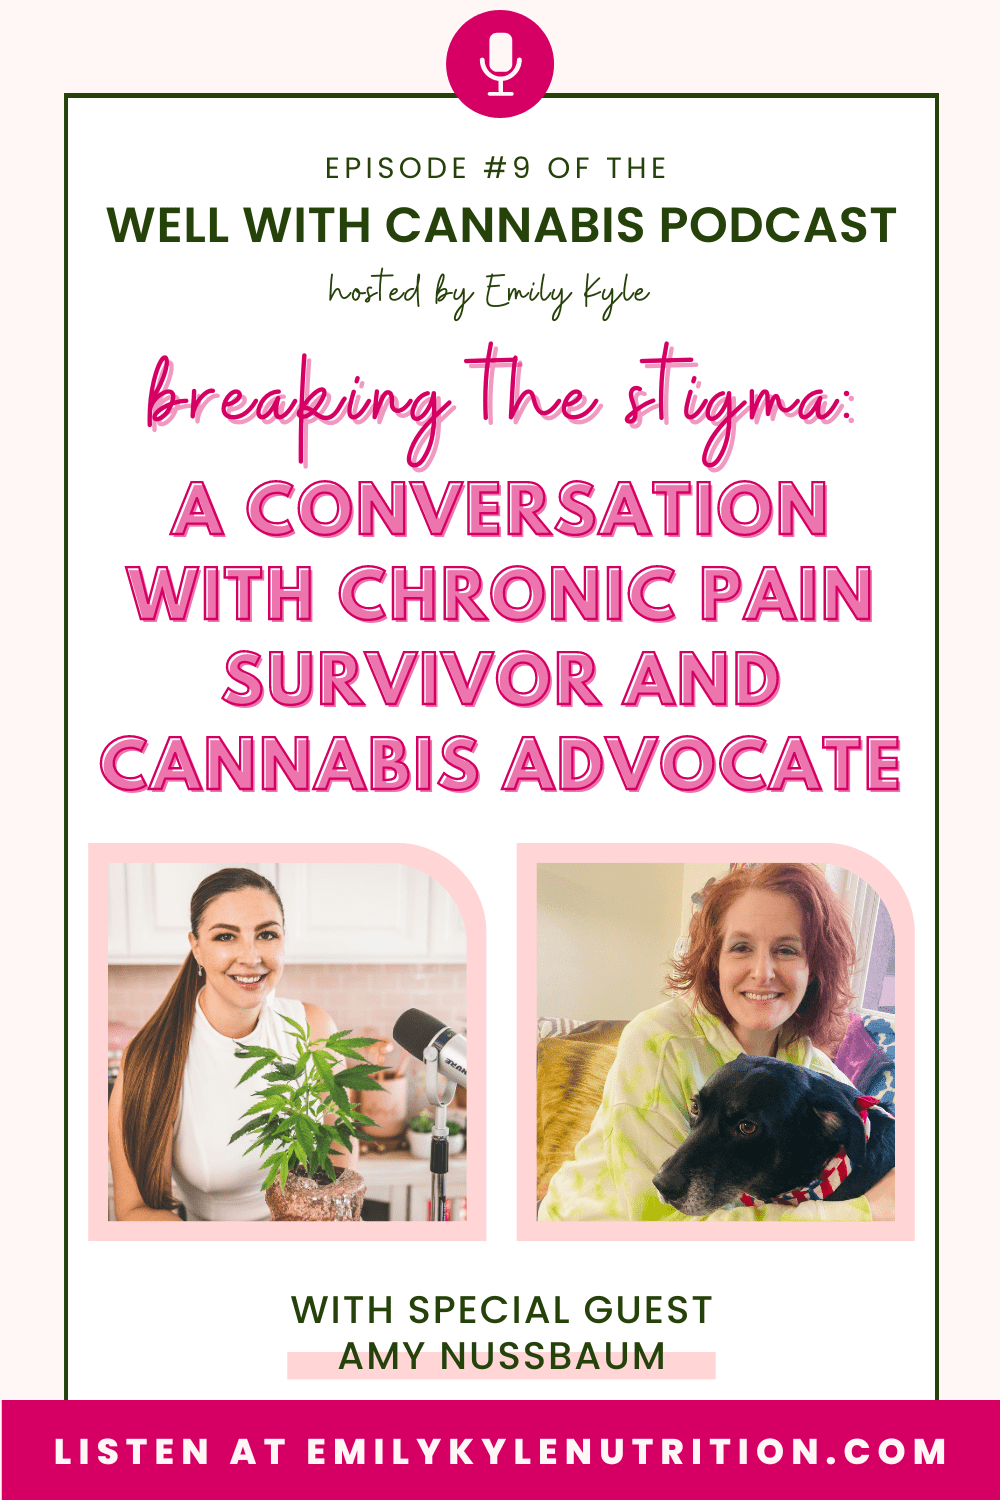 A picture of Amy Nussbaum, owner of Sammys Place 420, a guest on the Well With Cannabis Podcast with text that says chronic pain survivor to cannabis advocate.